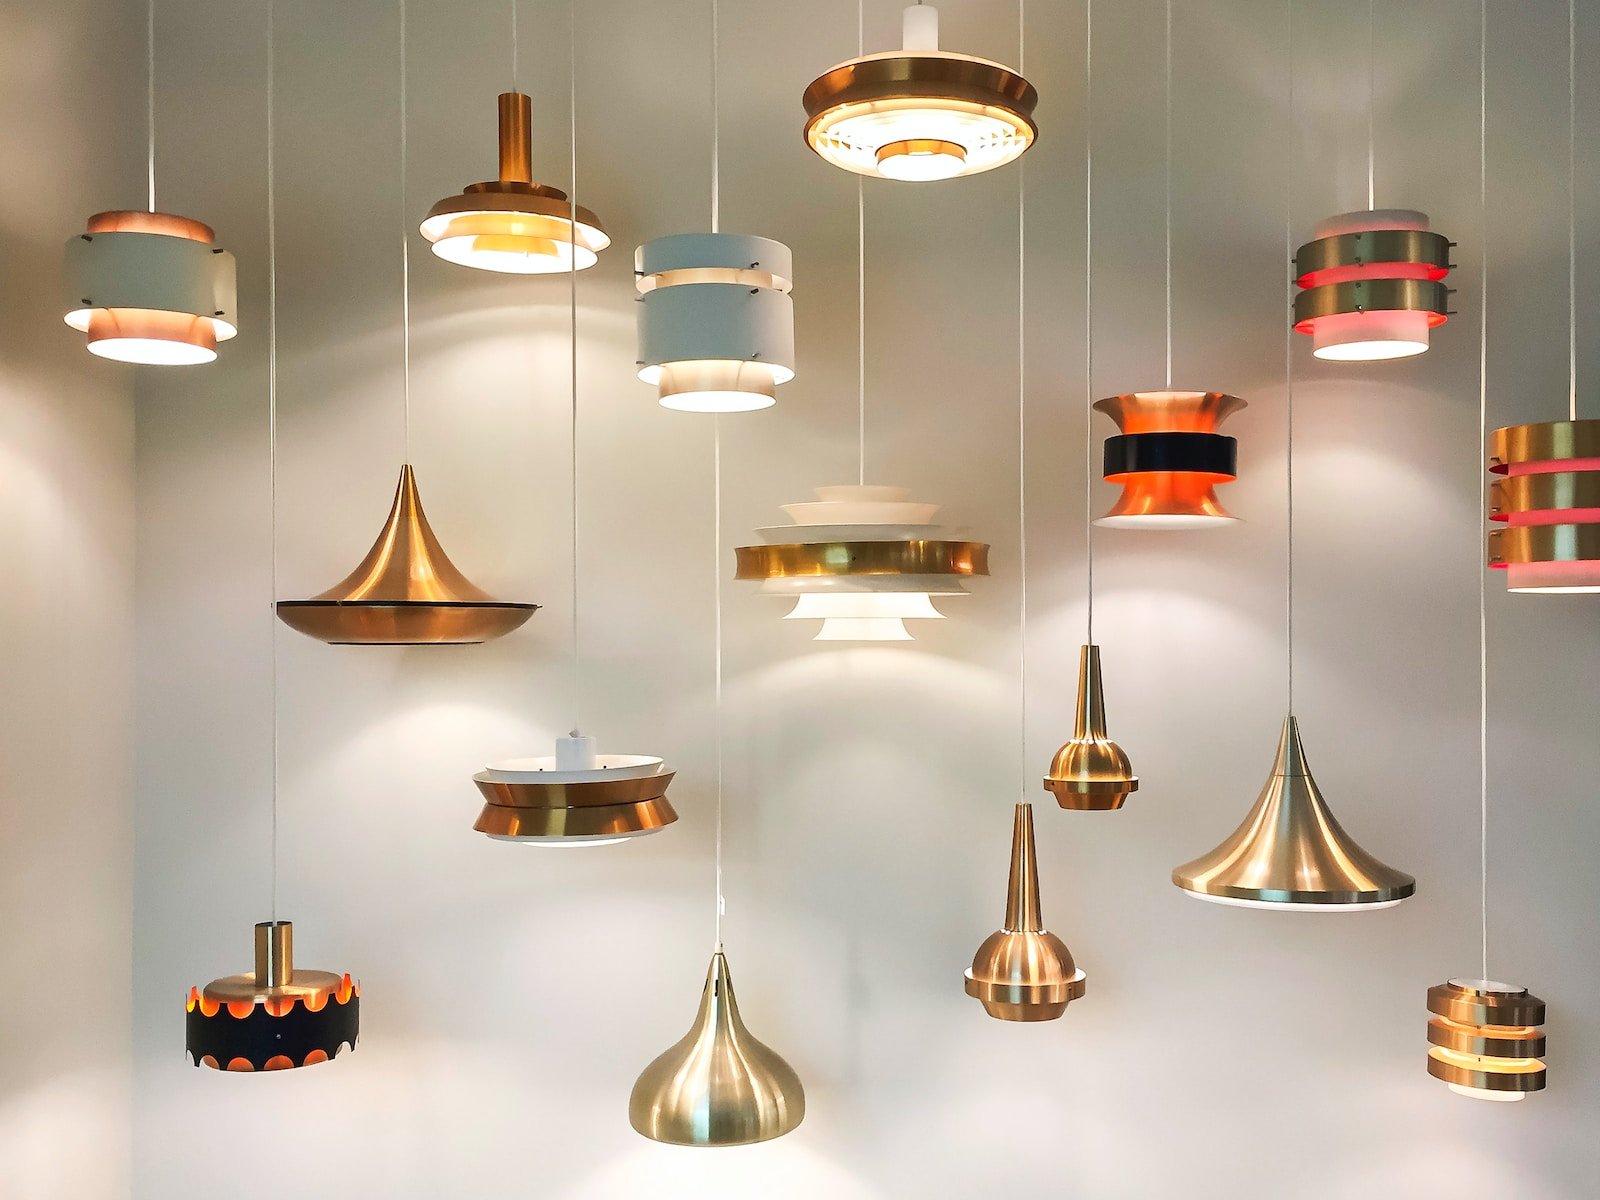 The Elegance and Innovation of Huxe Lighting